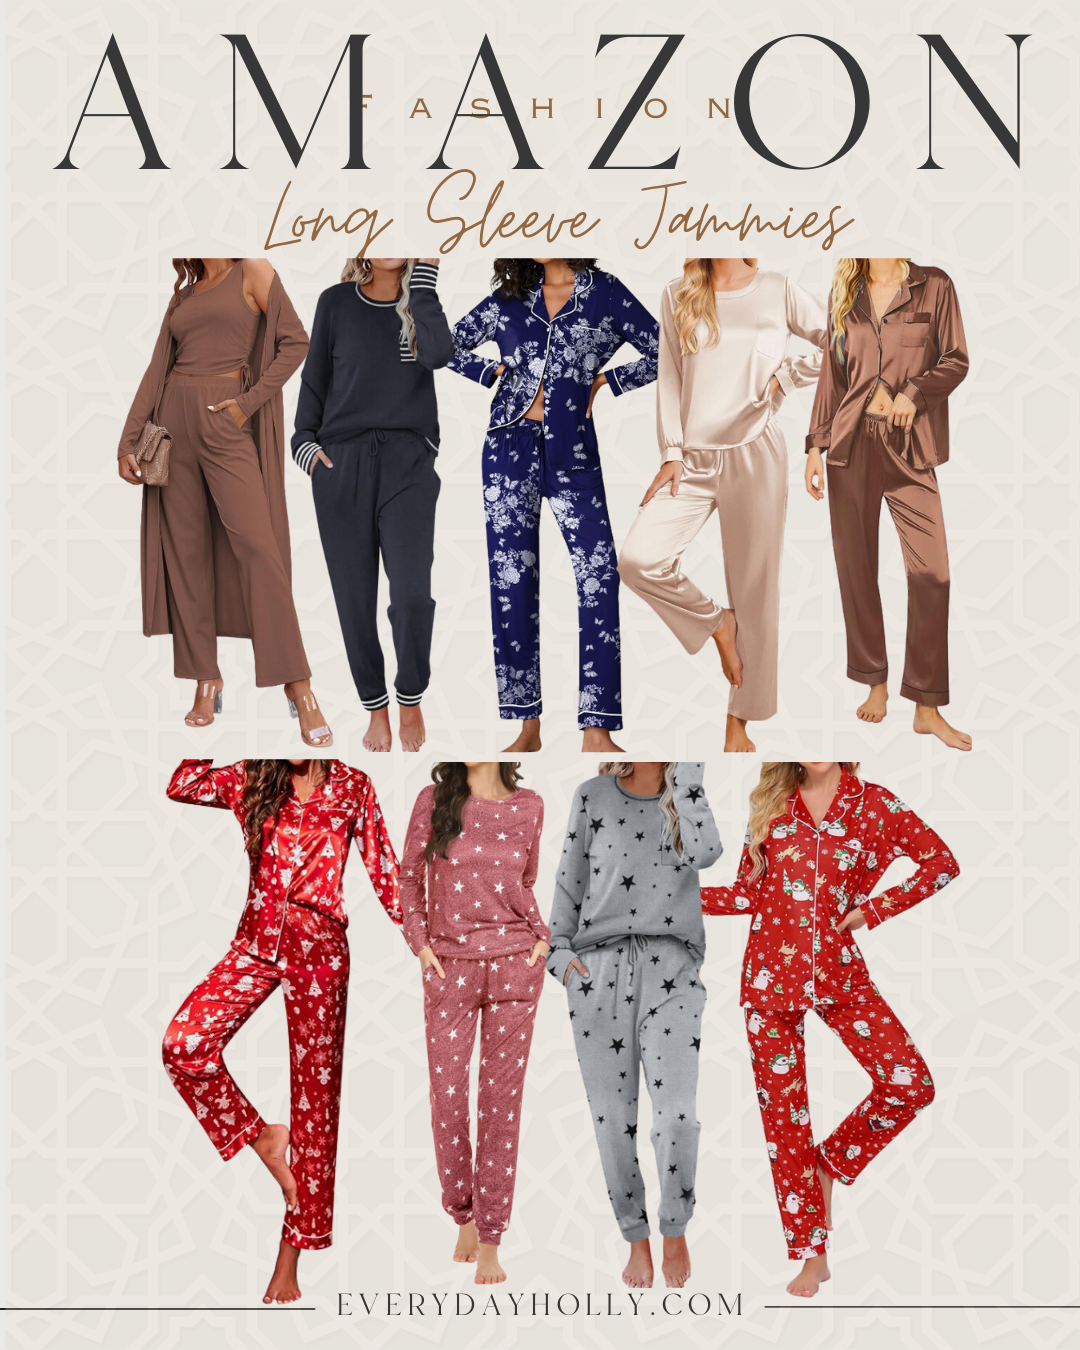 best jammies and loungewear amazon favorites | jammies, pajama sets, pajamas, loungewear, amazon, long sleeve jammies, matching sets, neutral, patterned jammies, satin jammies, silk jammies, holiday pajama